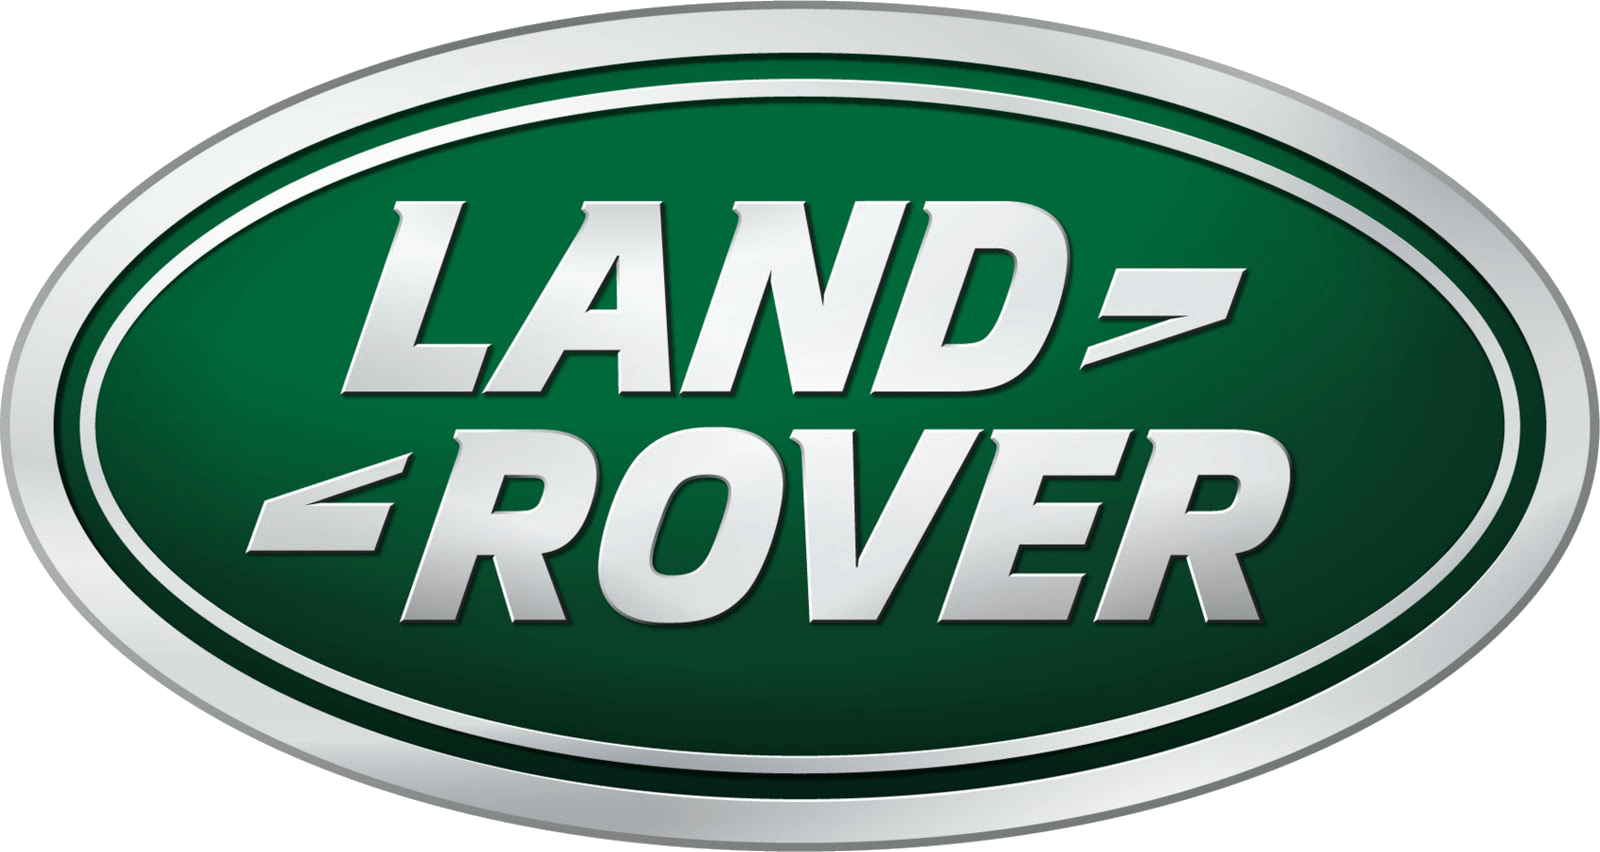 Green Oval Logo - Land Rover Logo, Land Rover Car Symbol Meaning and History | Car ...